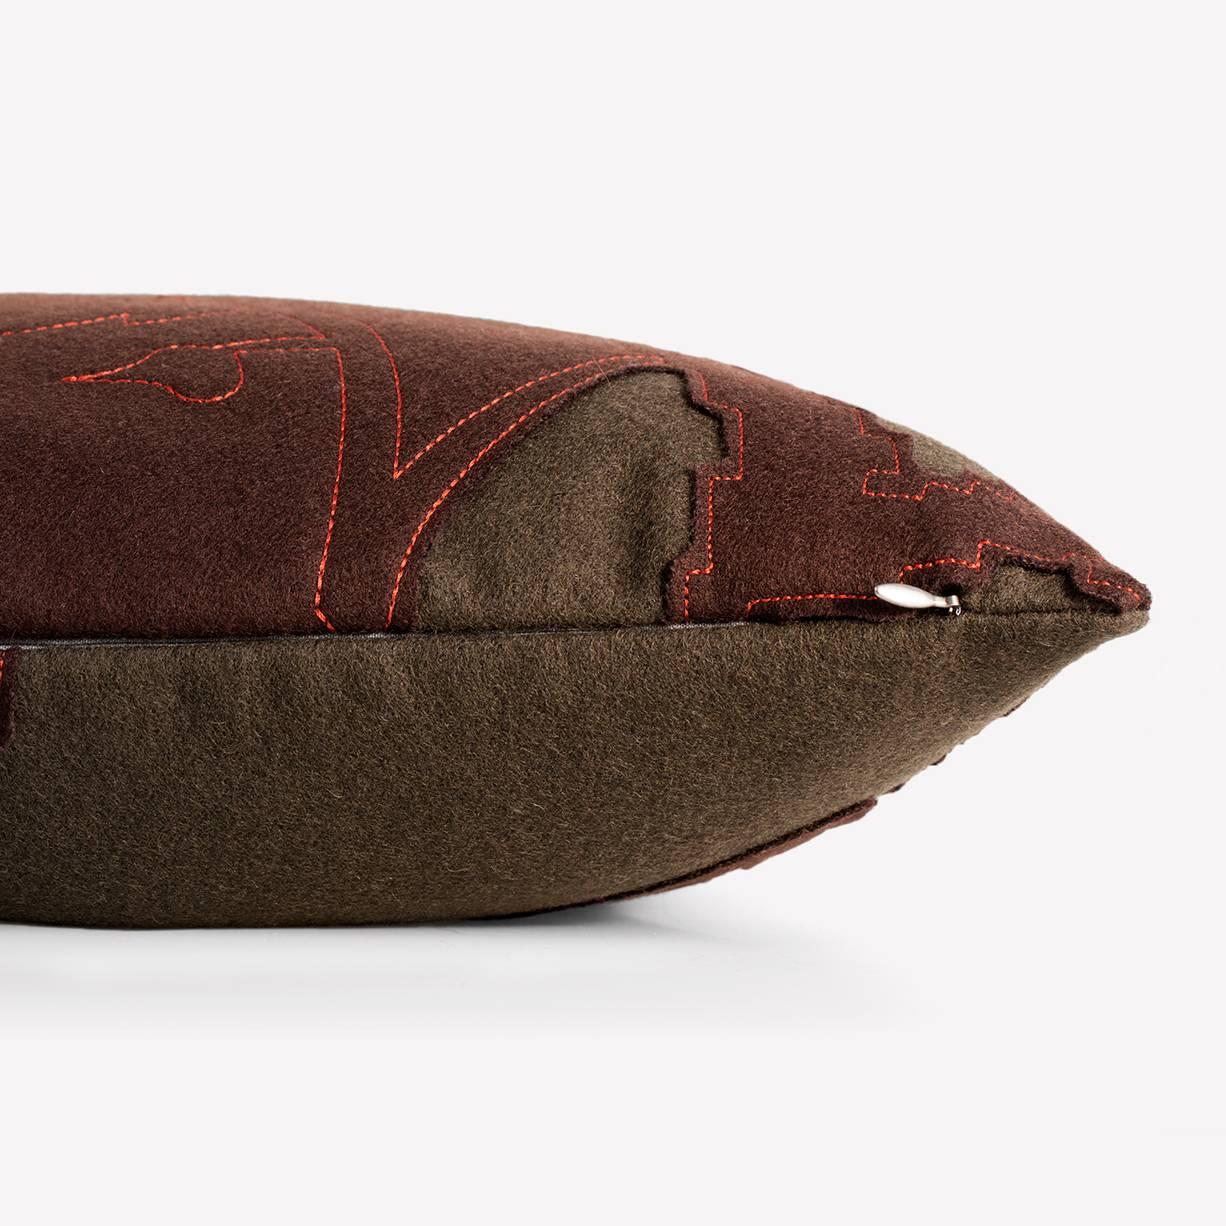 Maharam Pillow
Layers Garden Double by Hella Jongerius
002 Earth/Chocolate/Coral

Layers Garden Double combines Hella Jongerius' fascination with the manipulation of traditional manufacturing methods with an exploration of dimensionality. Jongerius